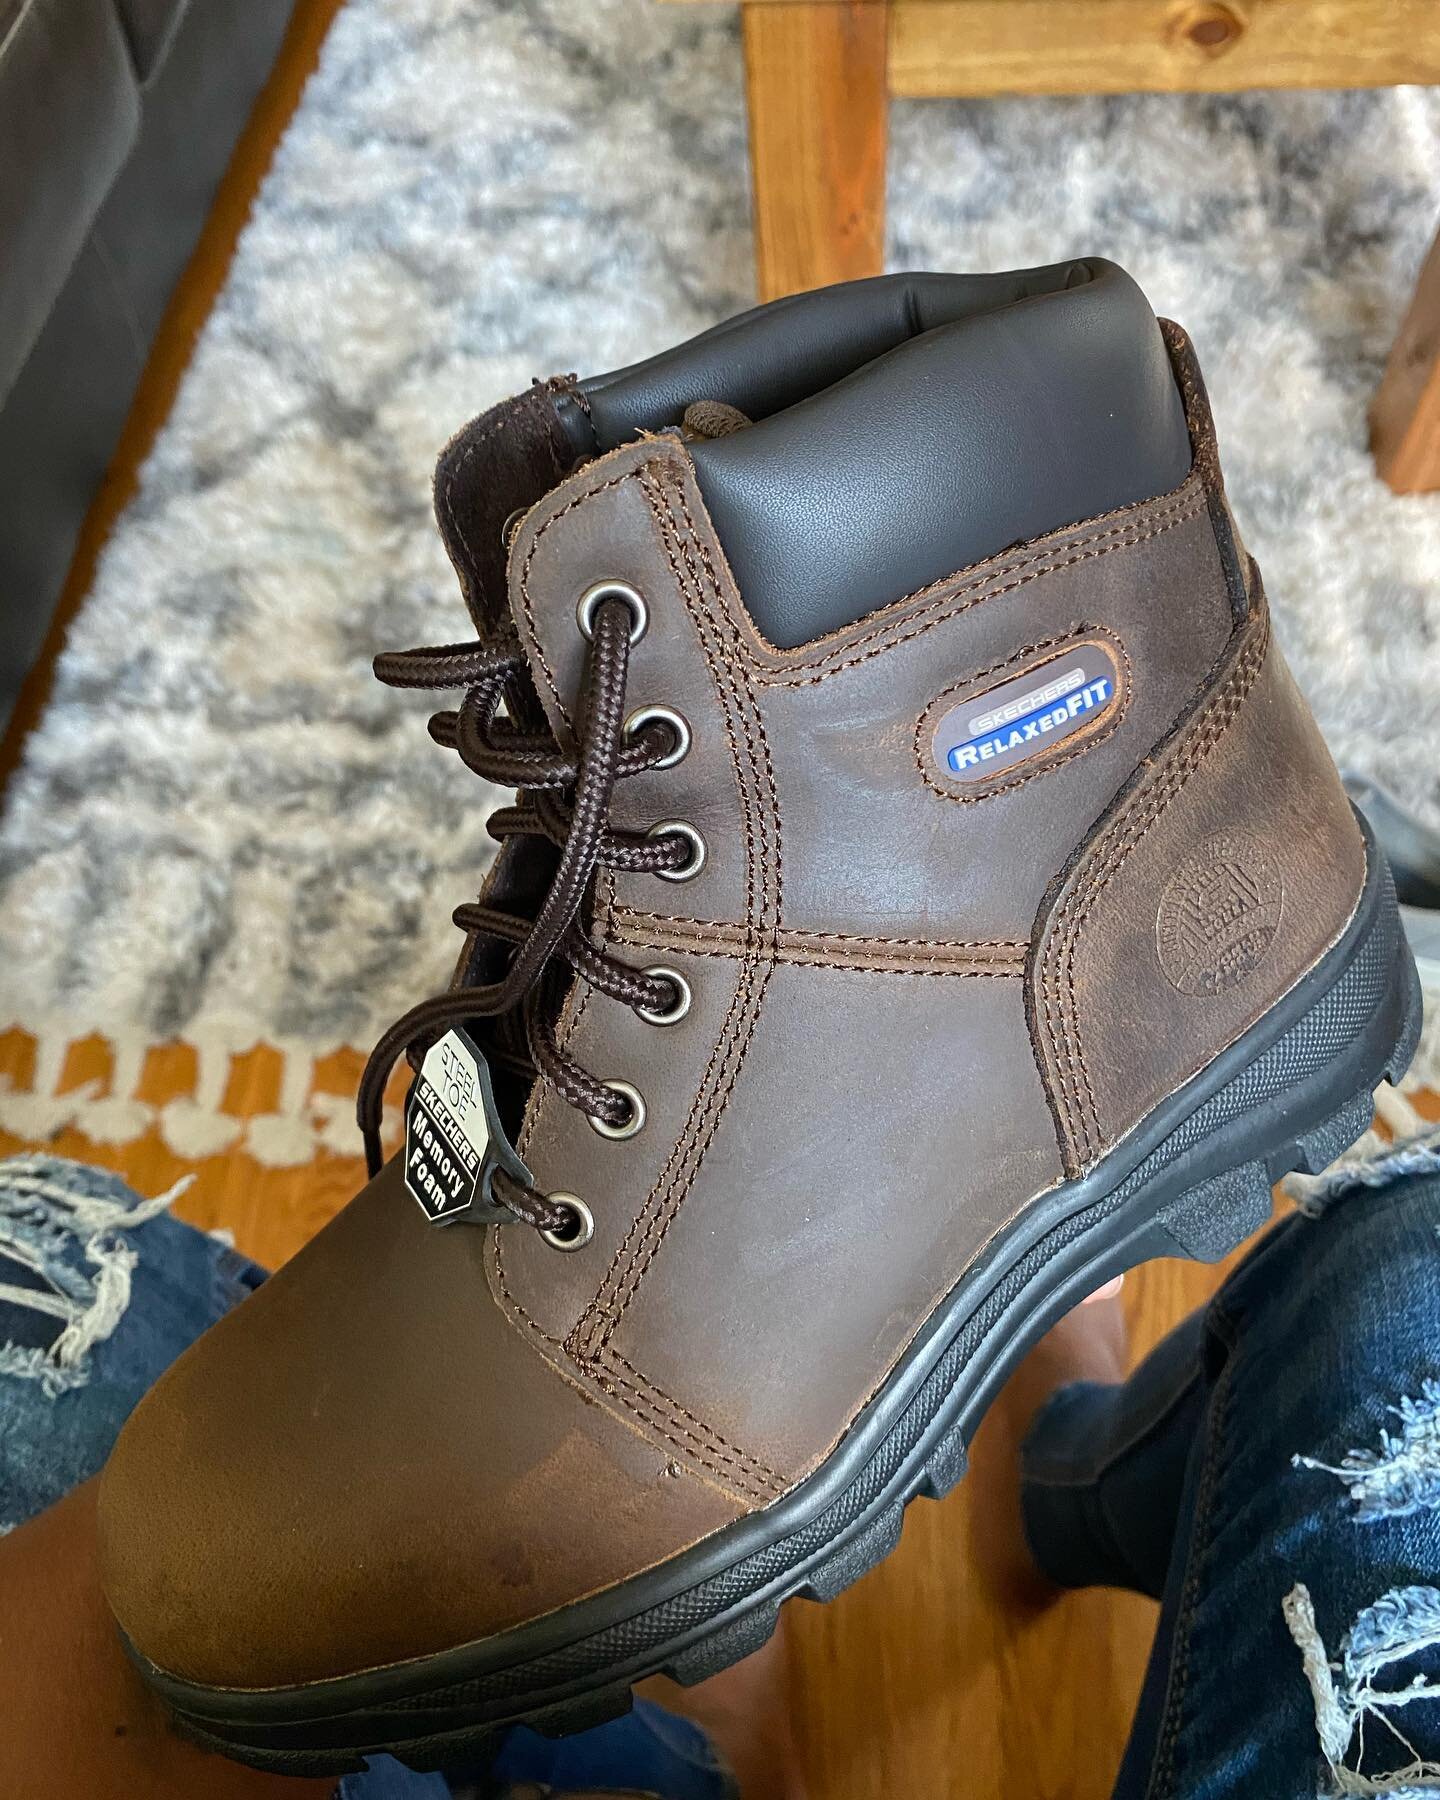 My other steel toed boots where bought back when I was a telephone pole climber for At&amp;t back in 2011. It was definitely time for some new boots 🥰 they are cute and comfy! 🥰🥰